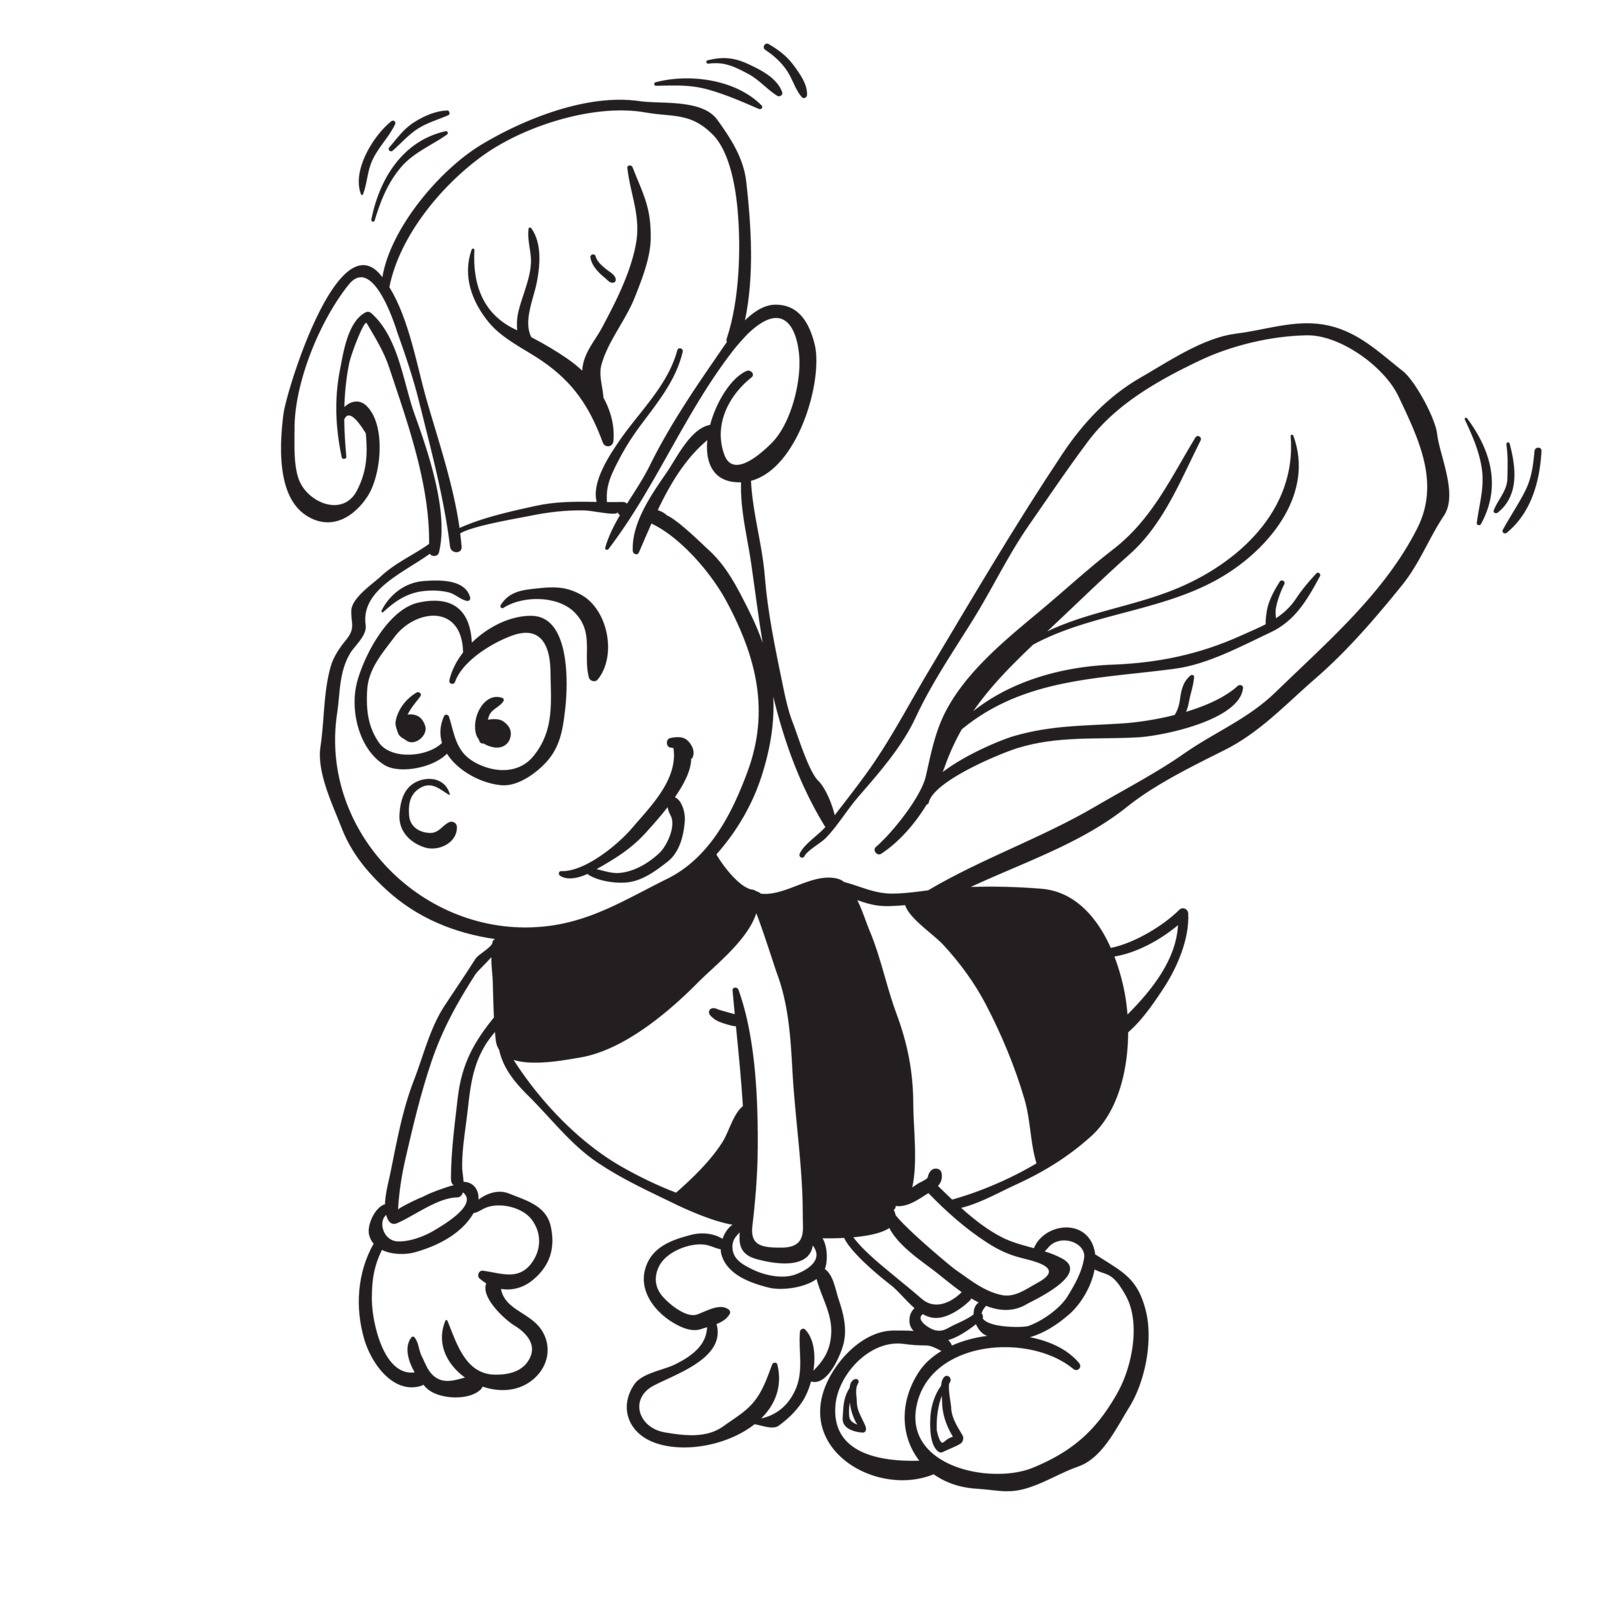 simple black and white bee cartoon by ainsel